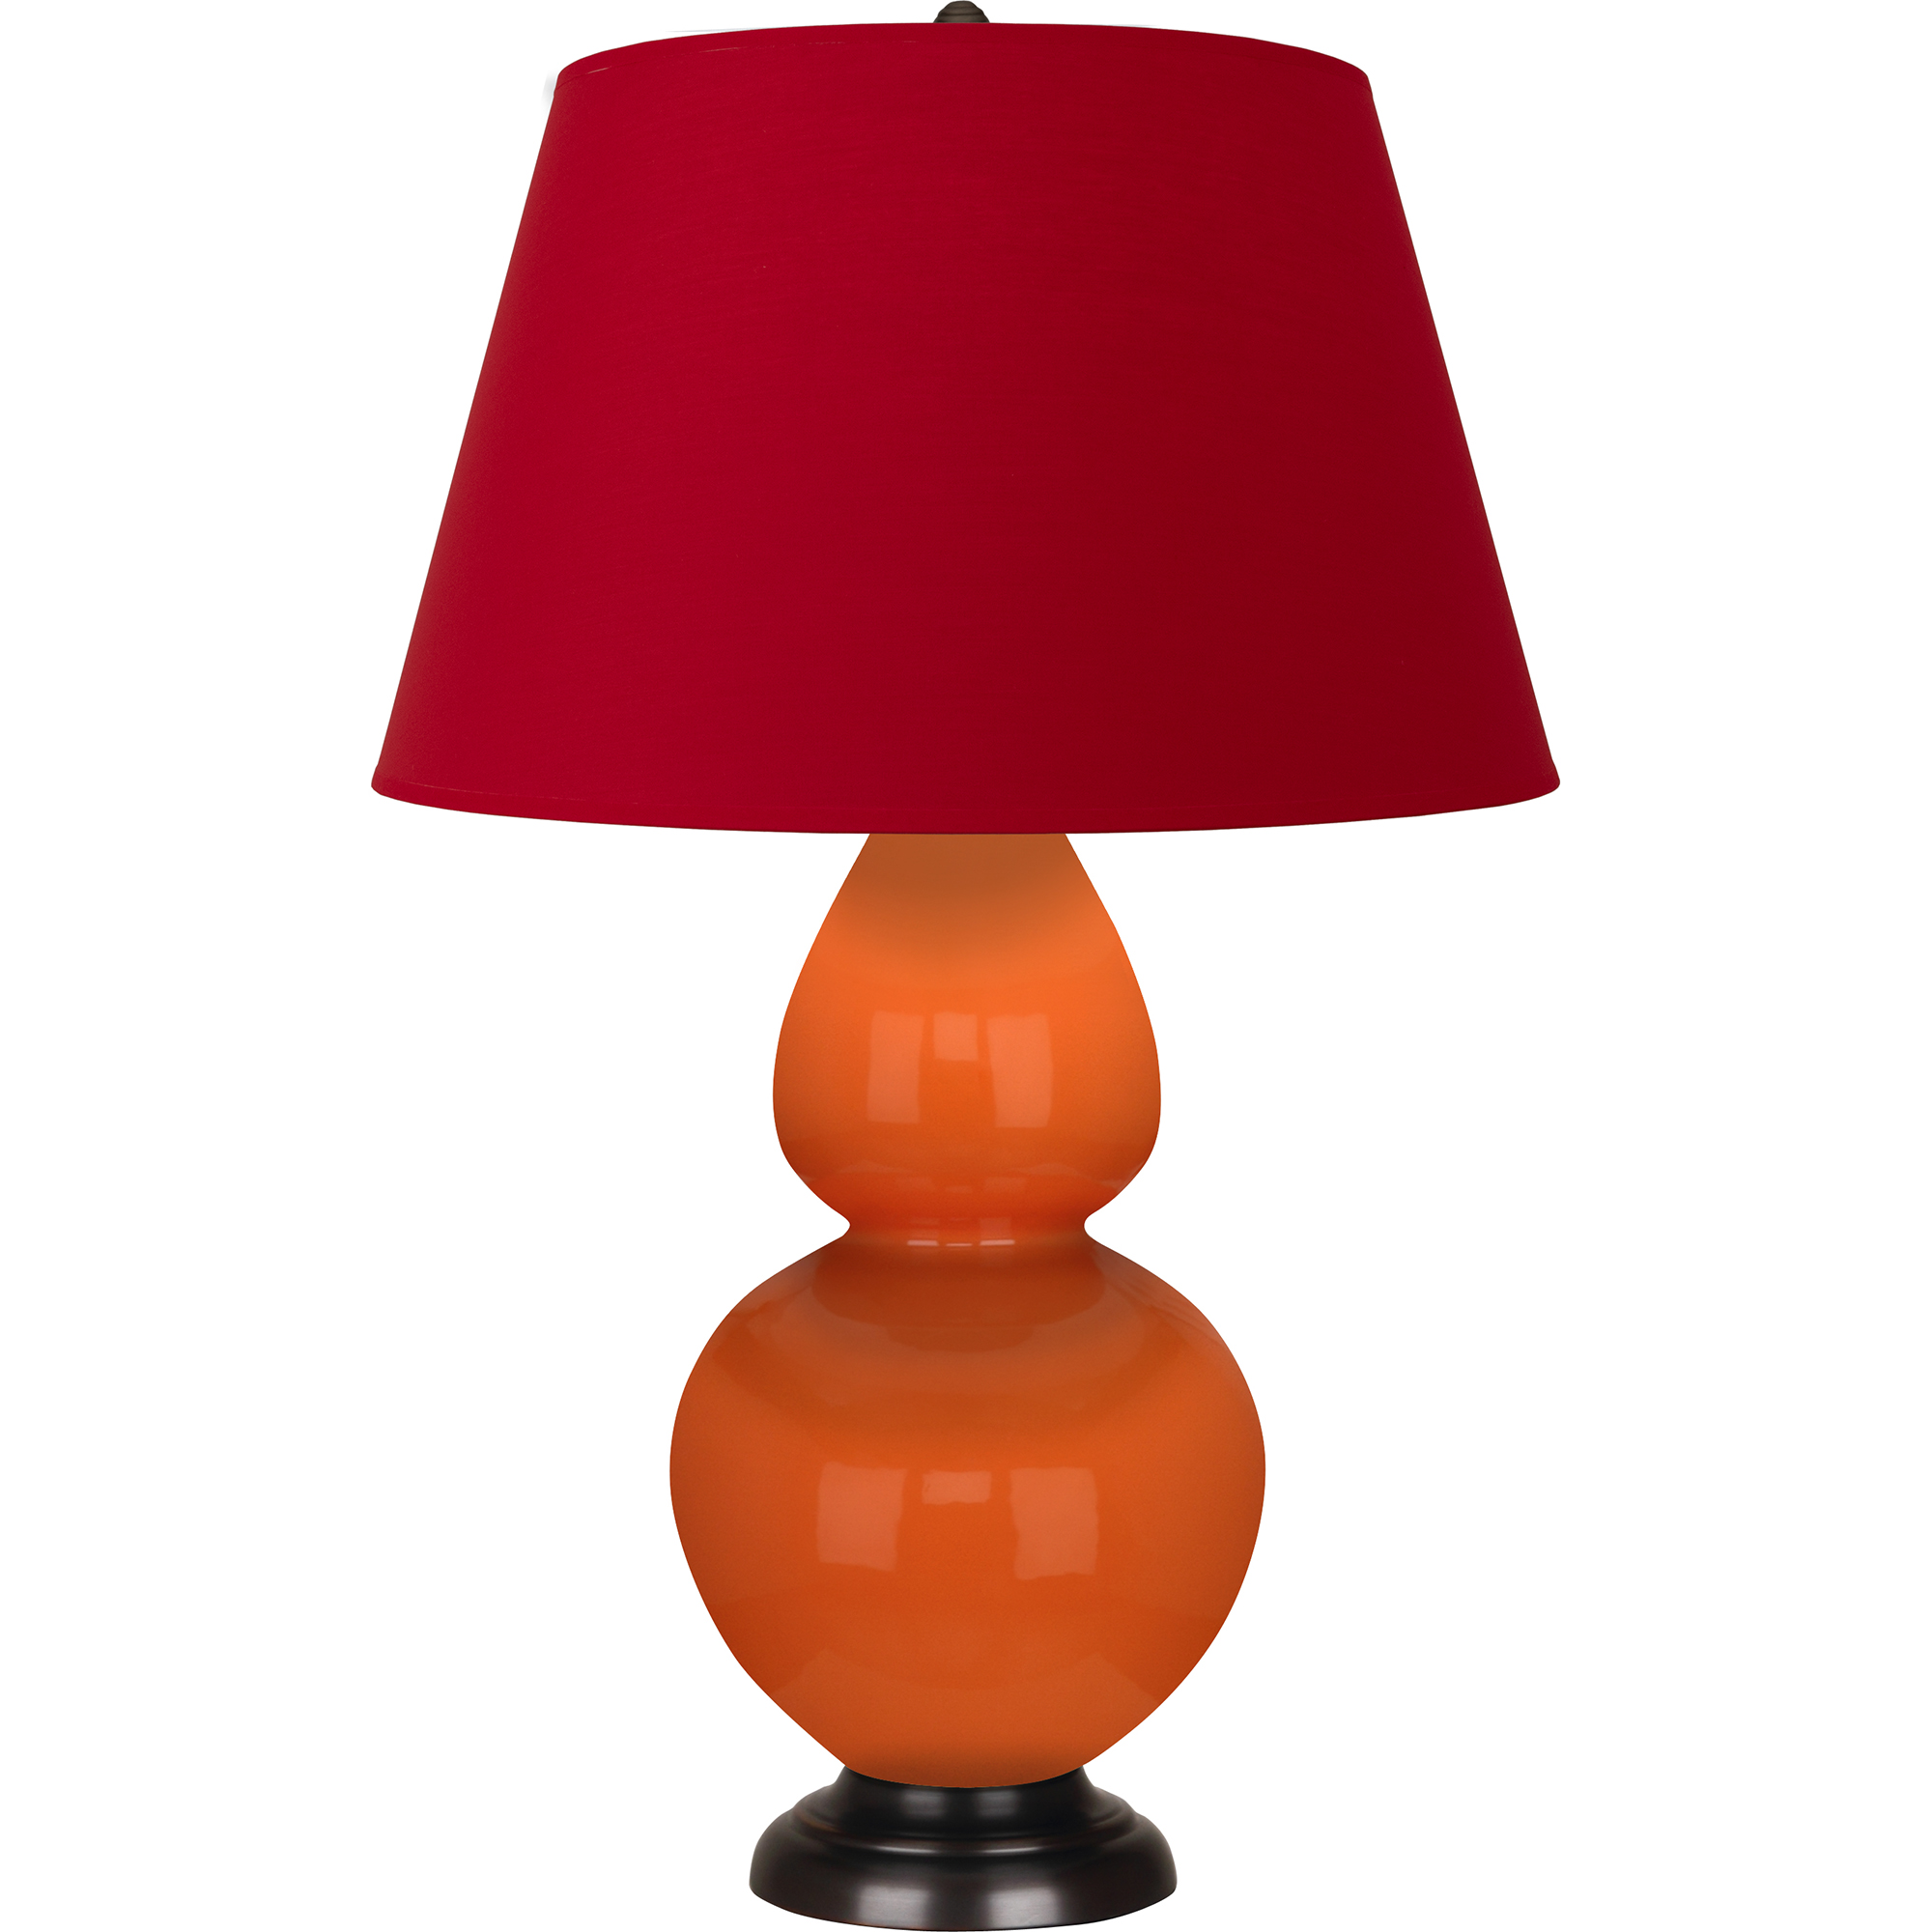 Double Gourd Table Lamp Style #1645R